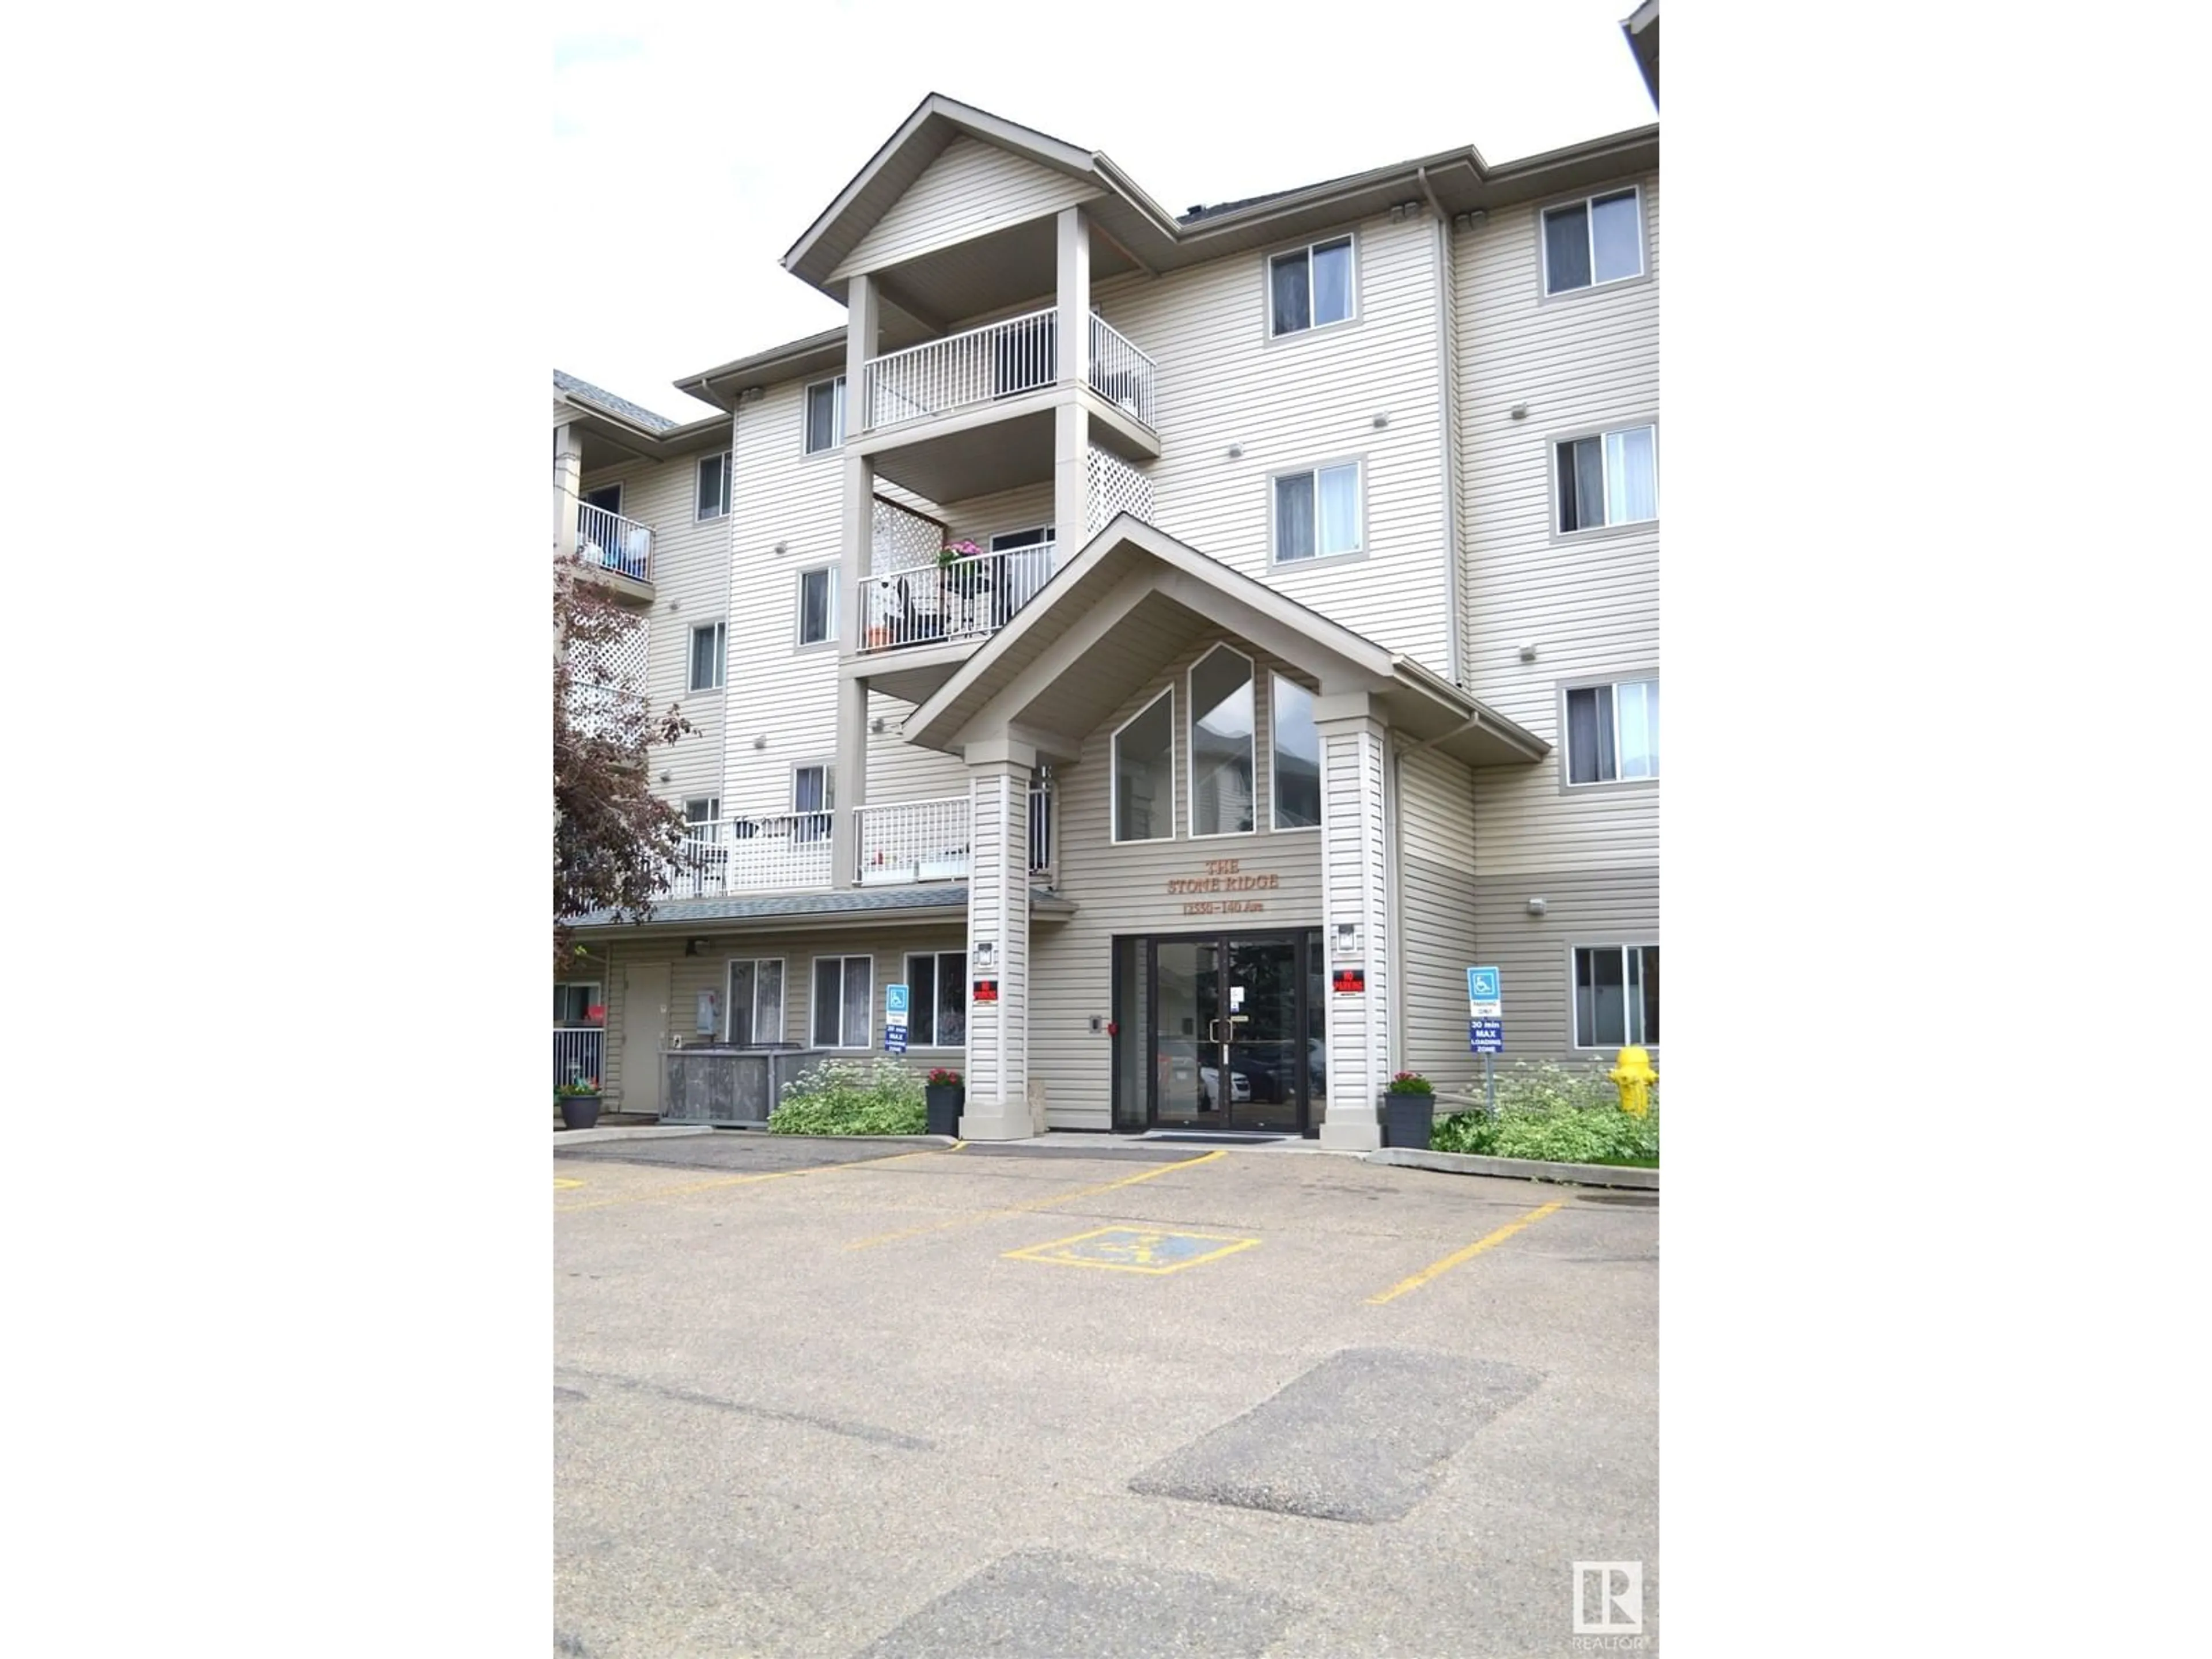 A pic from exterior of the house or condo for #319 12550 140 Ave NW, Edmonton Alberta T5X6J4